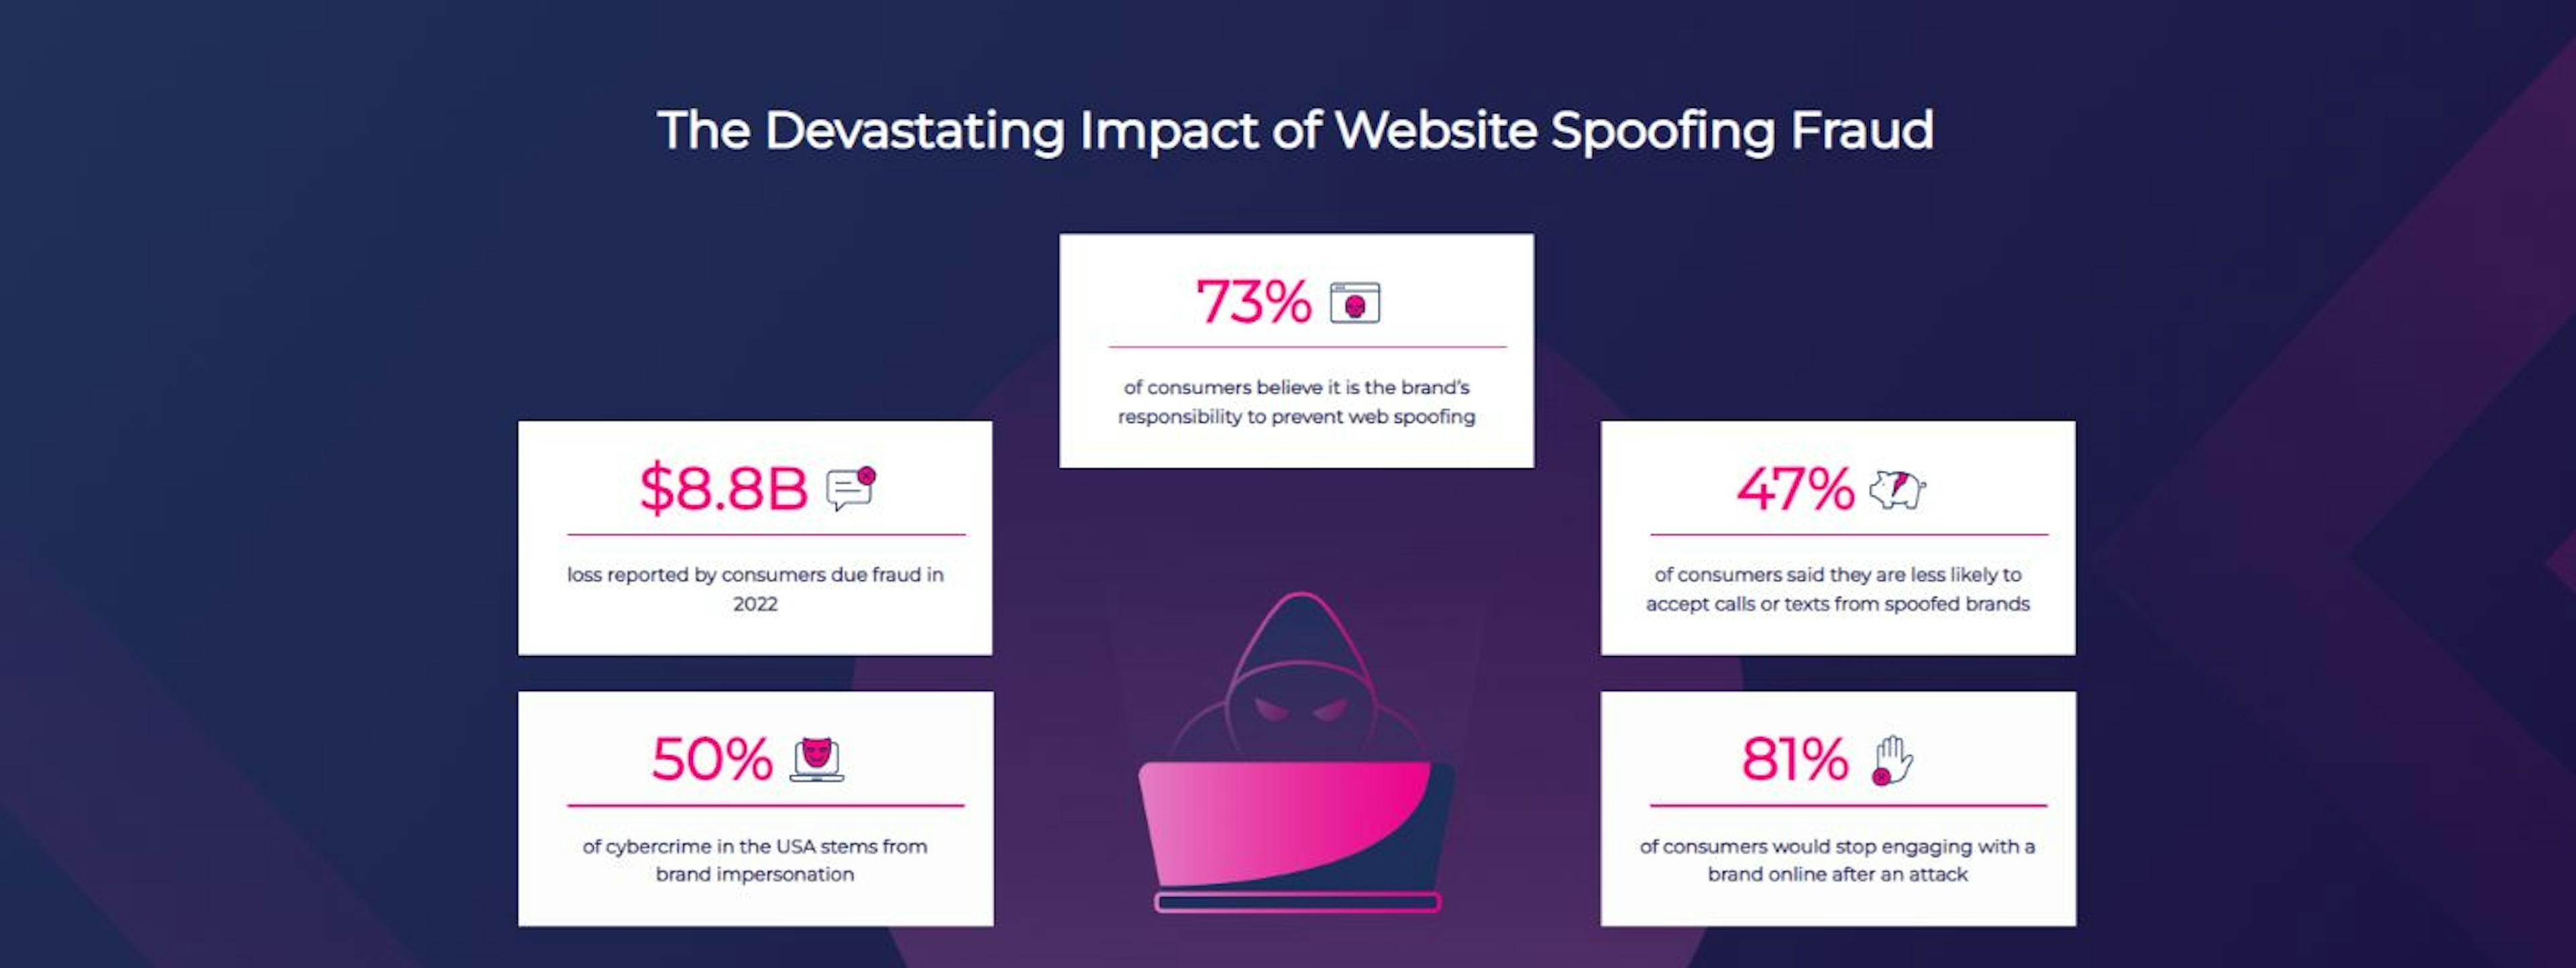 Website Spoofing Fraud Impact Can Be Critical for Organizations